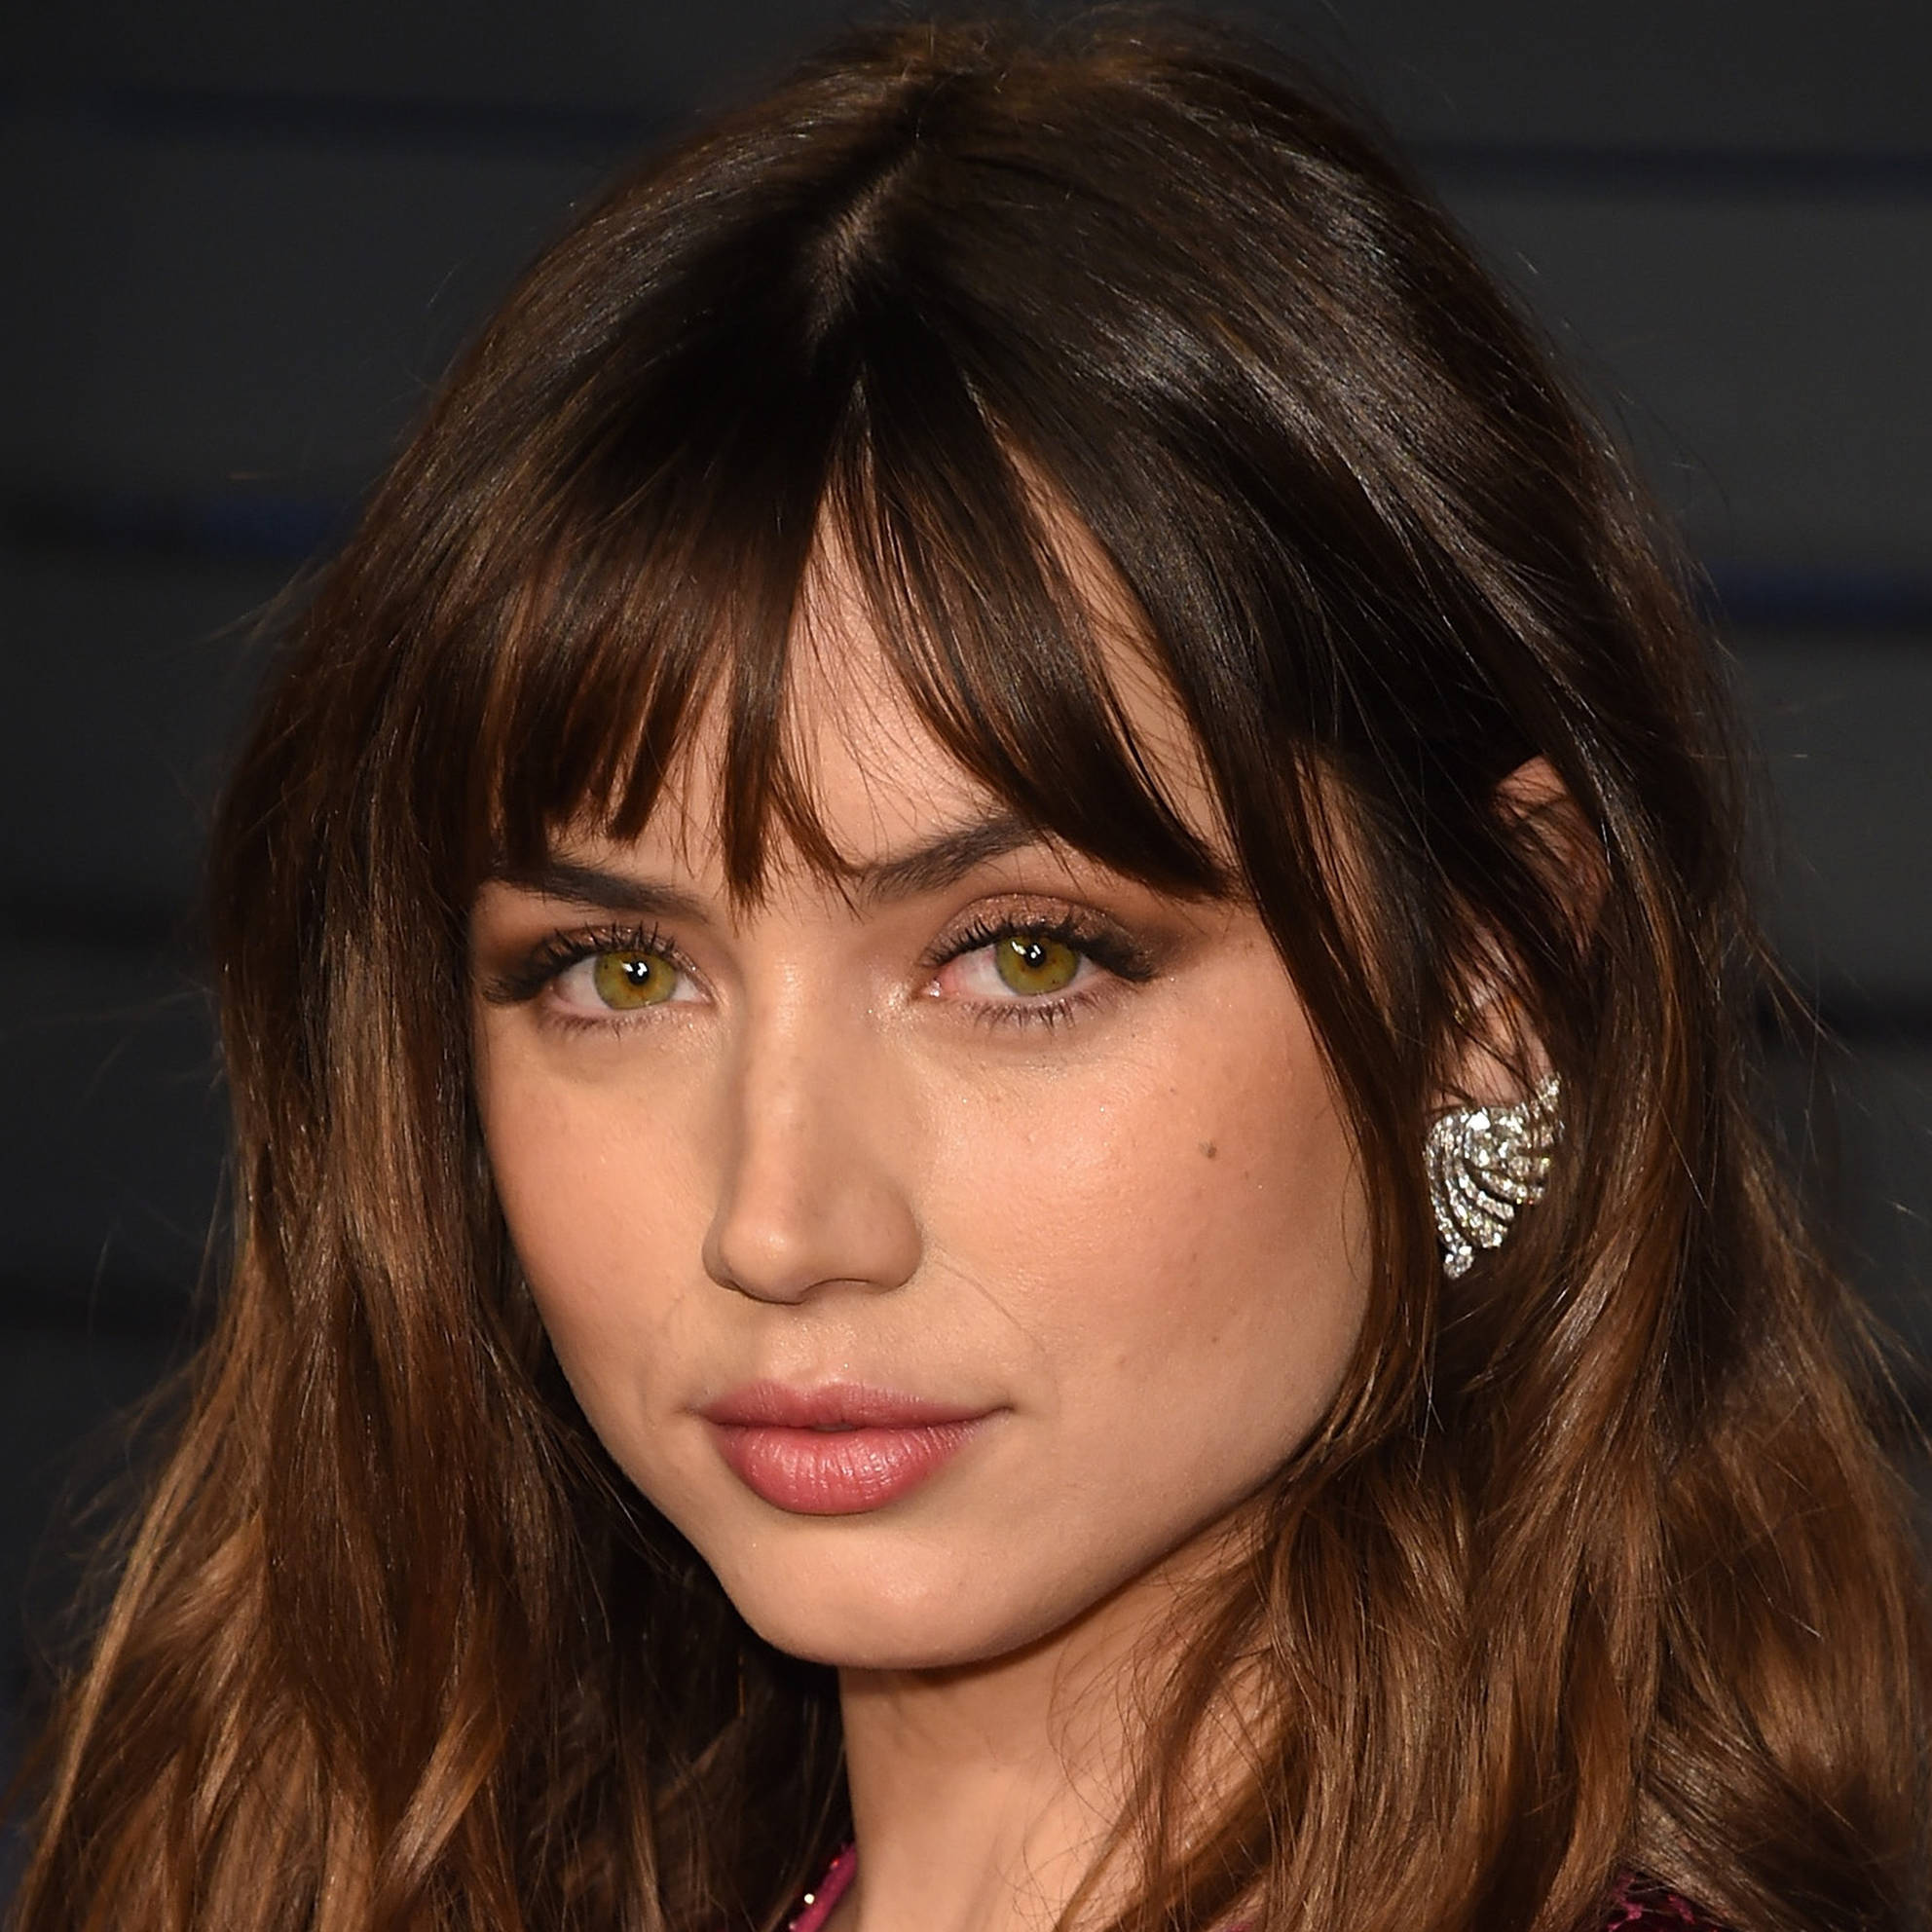 Ana De Armas From No Time To Die Movie Wallpapers